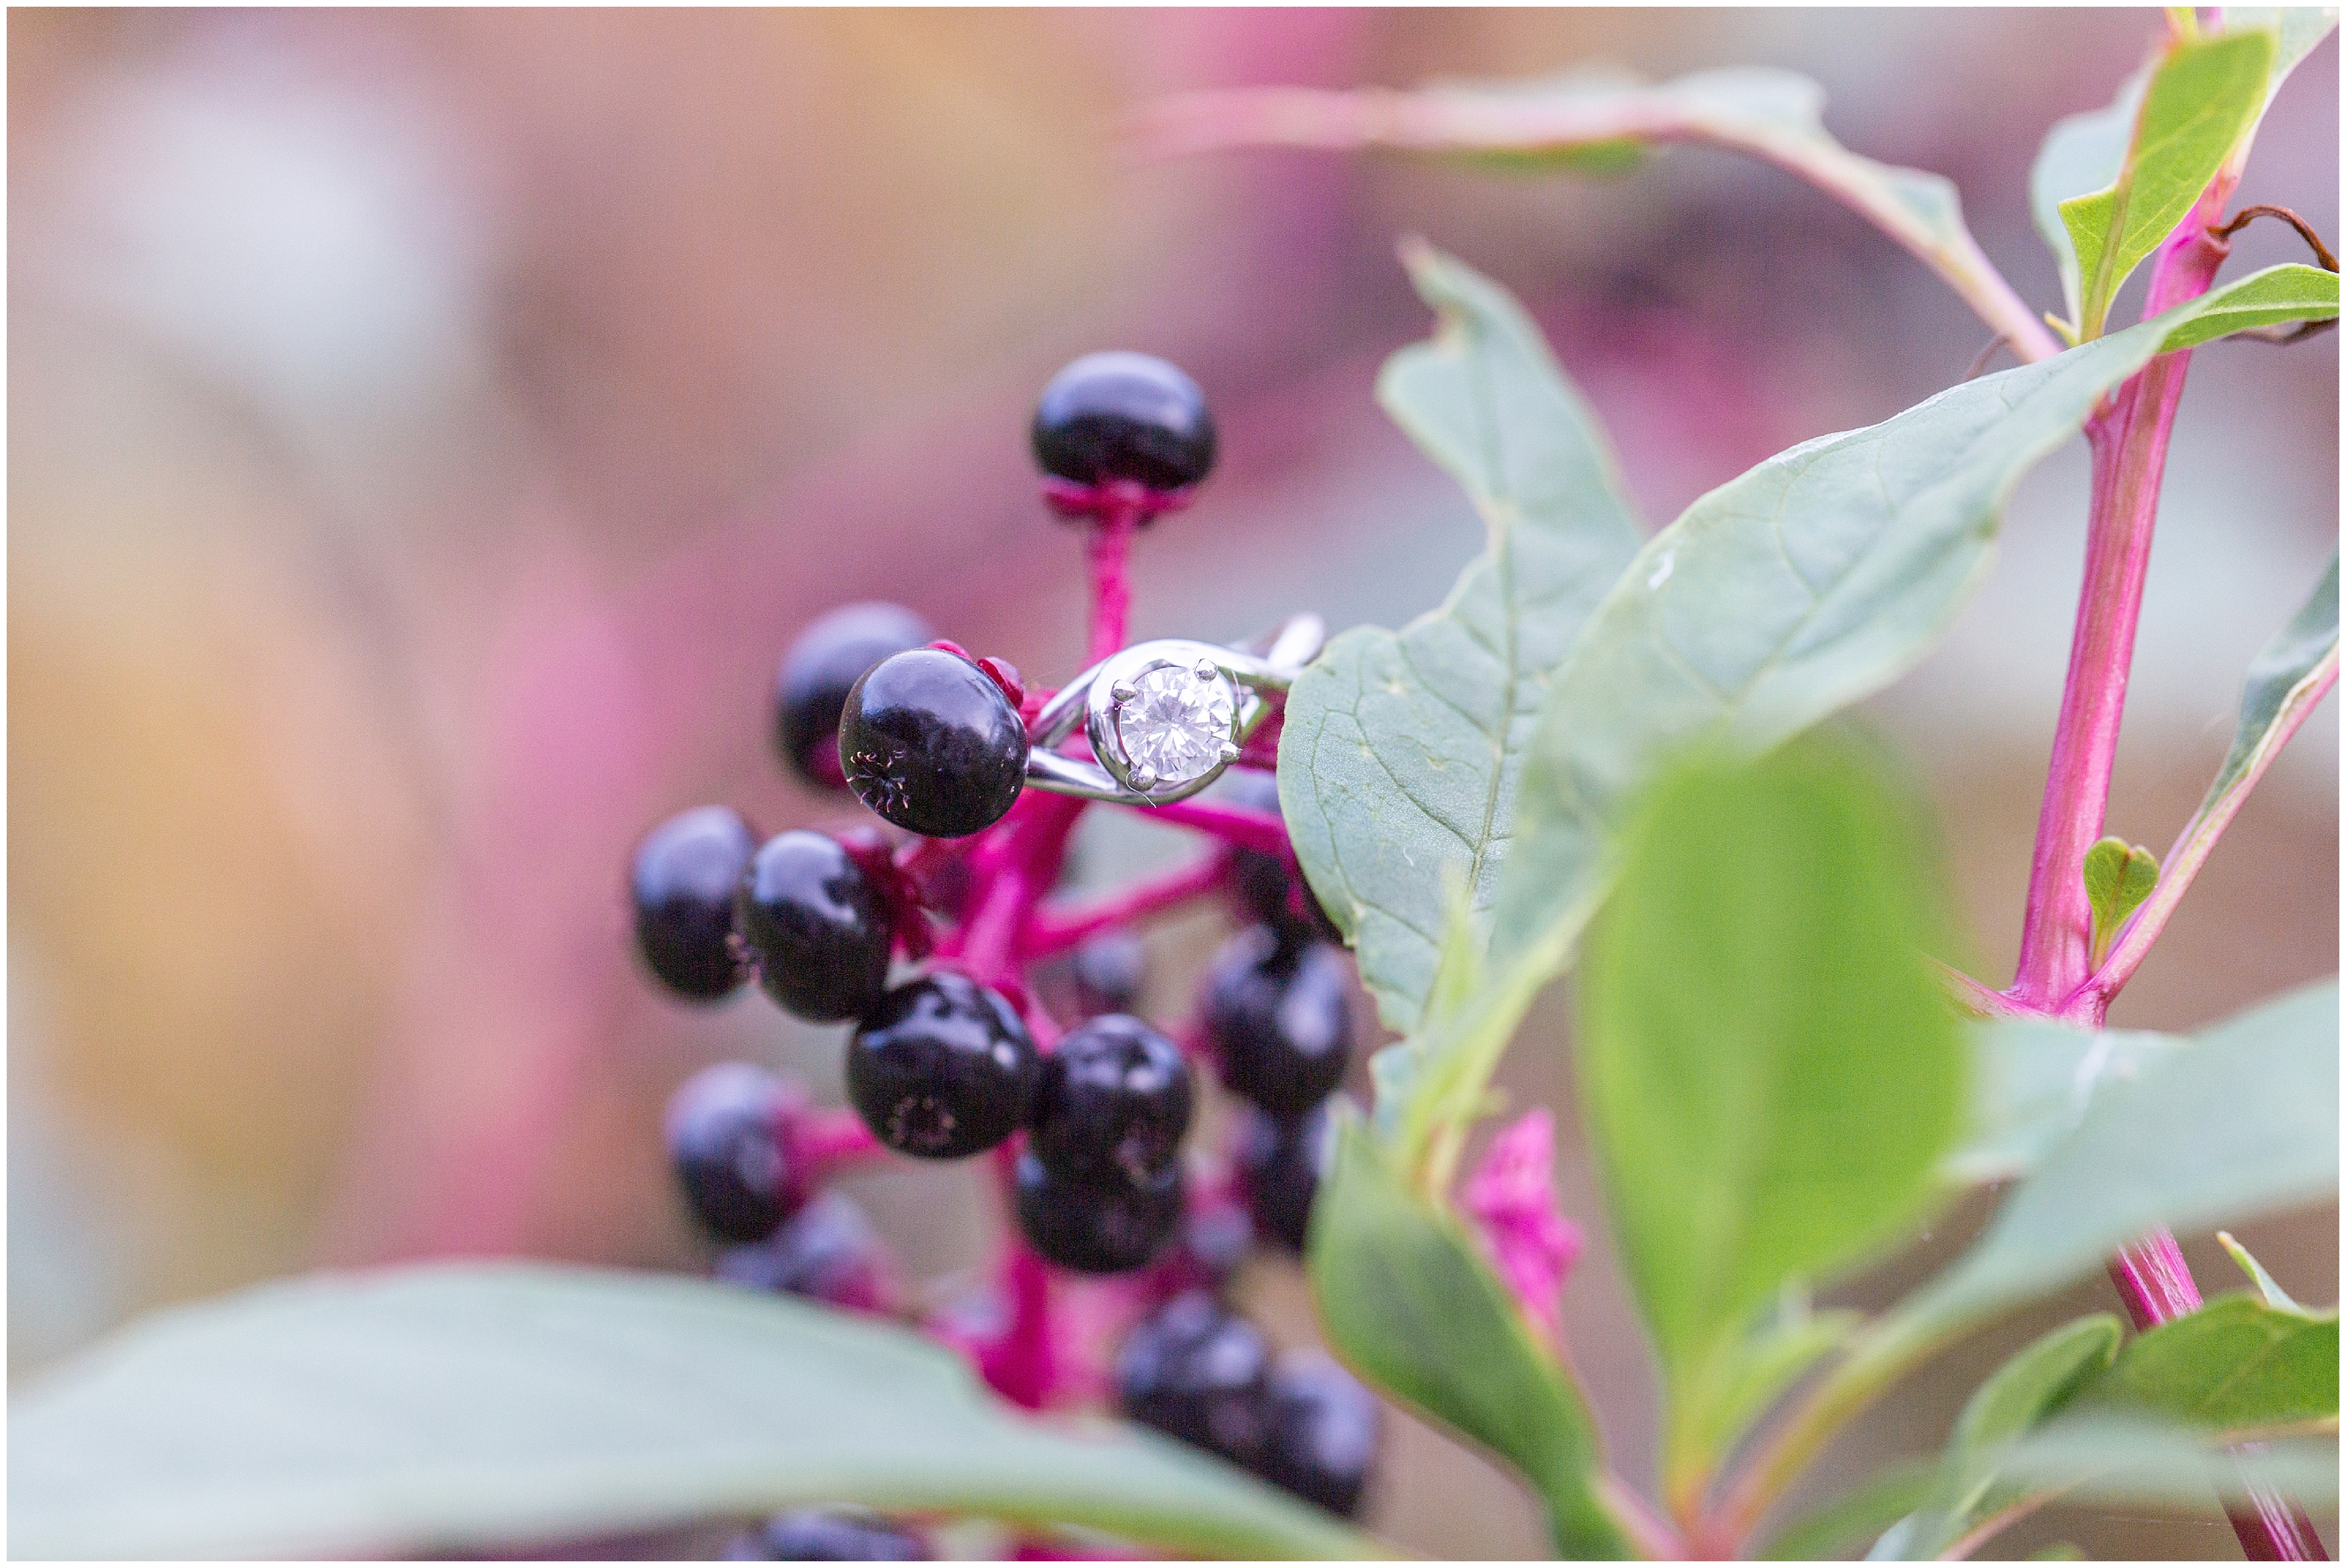 engagement ring near on berry branch in Greenville SC